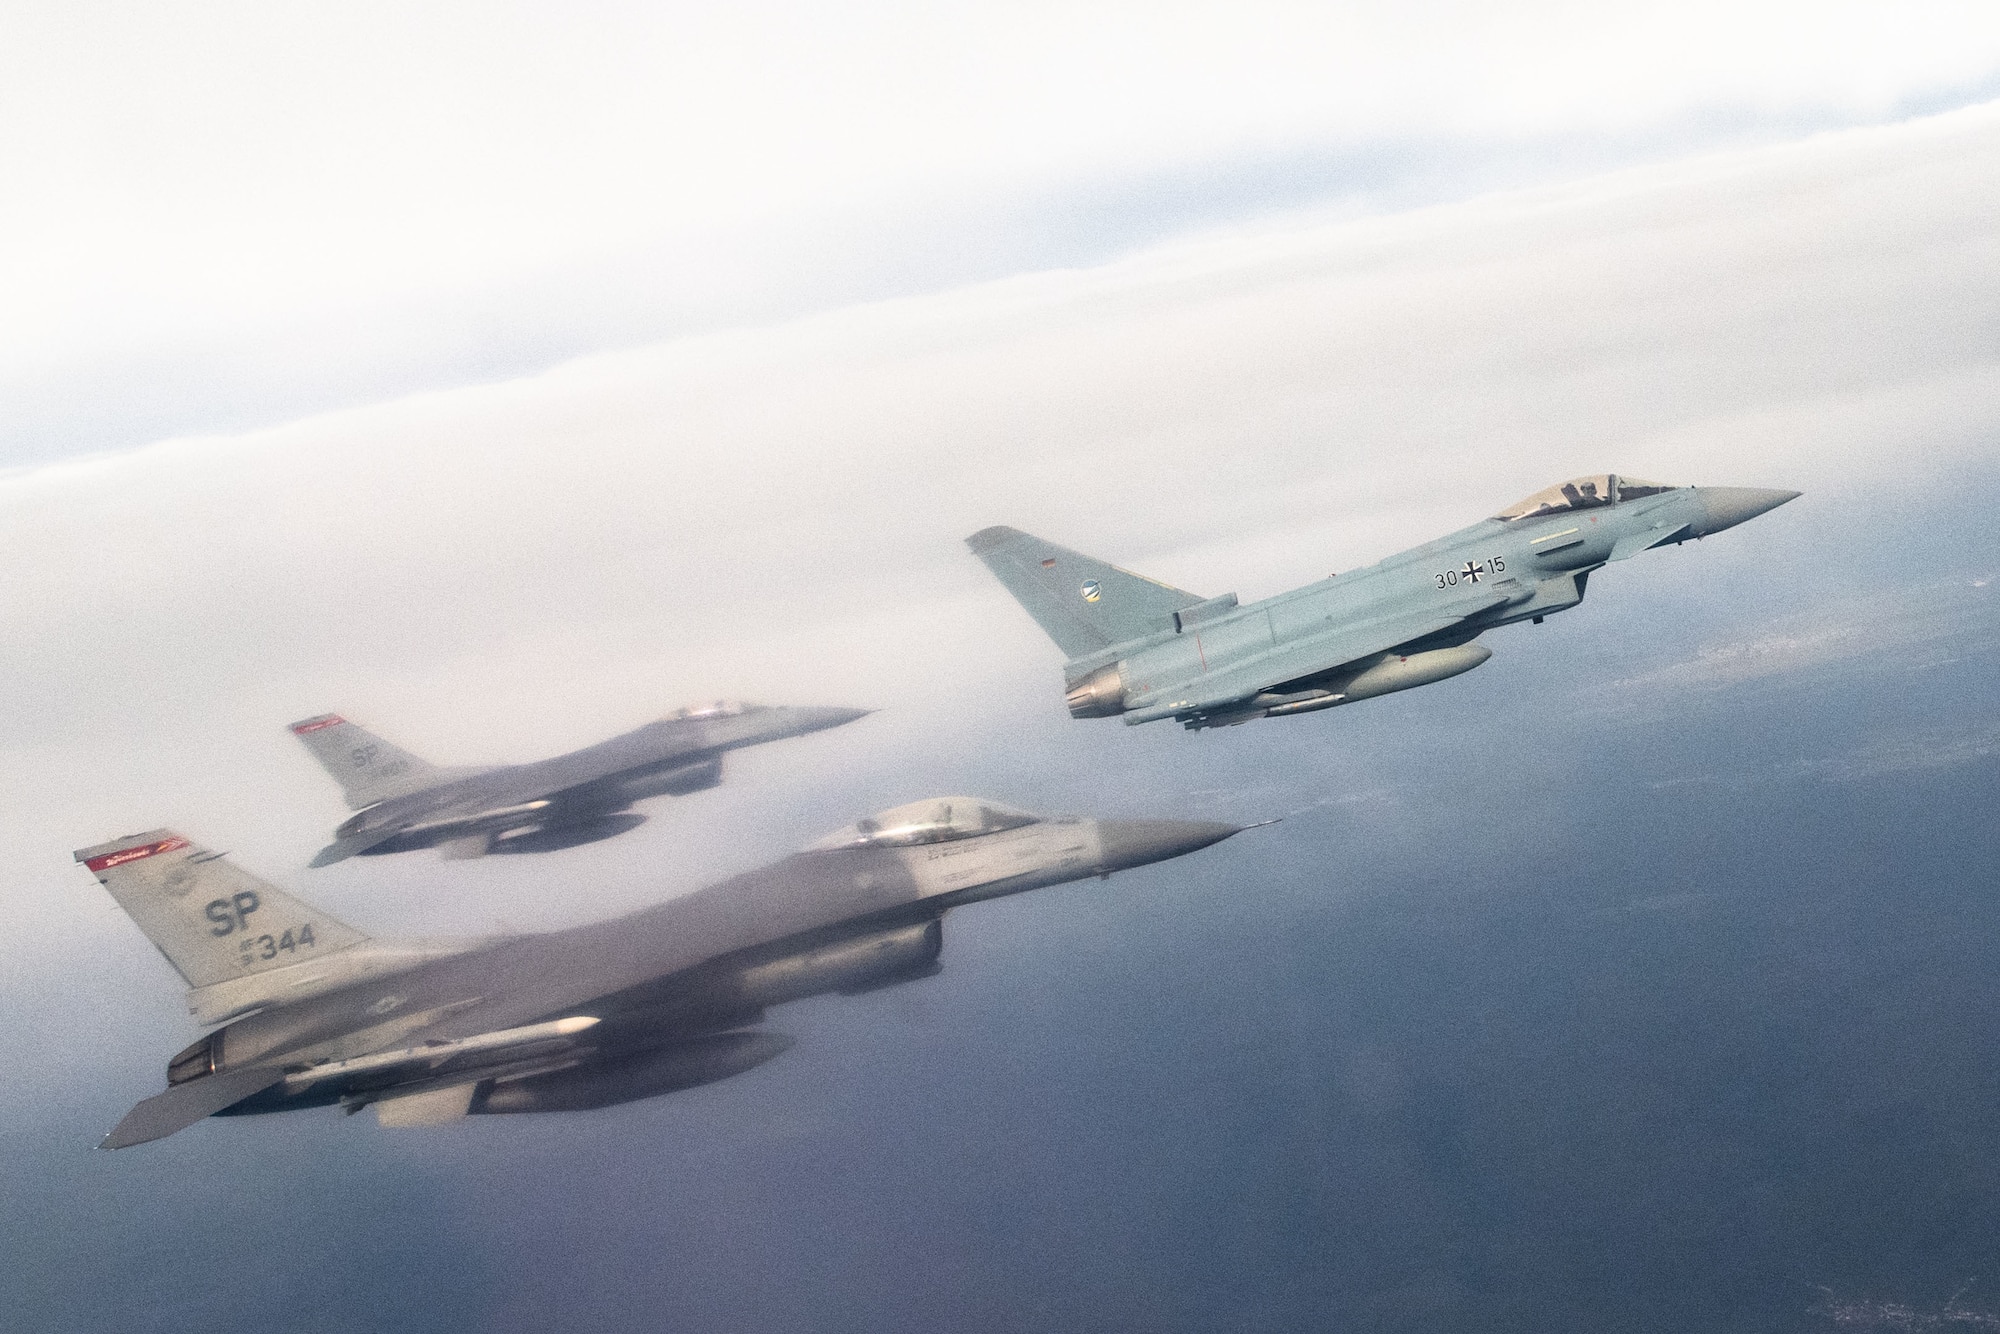 U.S. Air Force F-16 Fighting Falcon assigned to the 480th Fighter Squadron at Spangdahlem Air Base, Germany, fly alongside a German air force Eurofighter Typhoon assigned to the 74th Tactical Air Wing over Germany, Feb. 16, 2023.